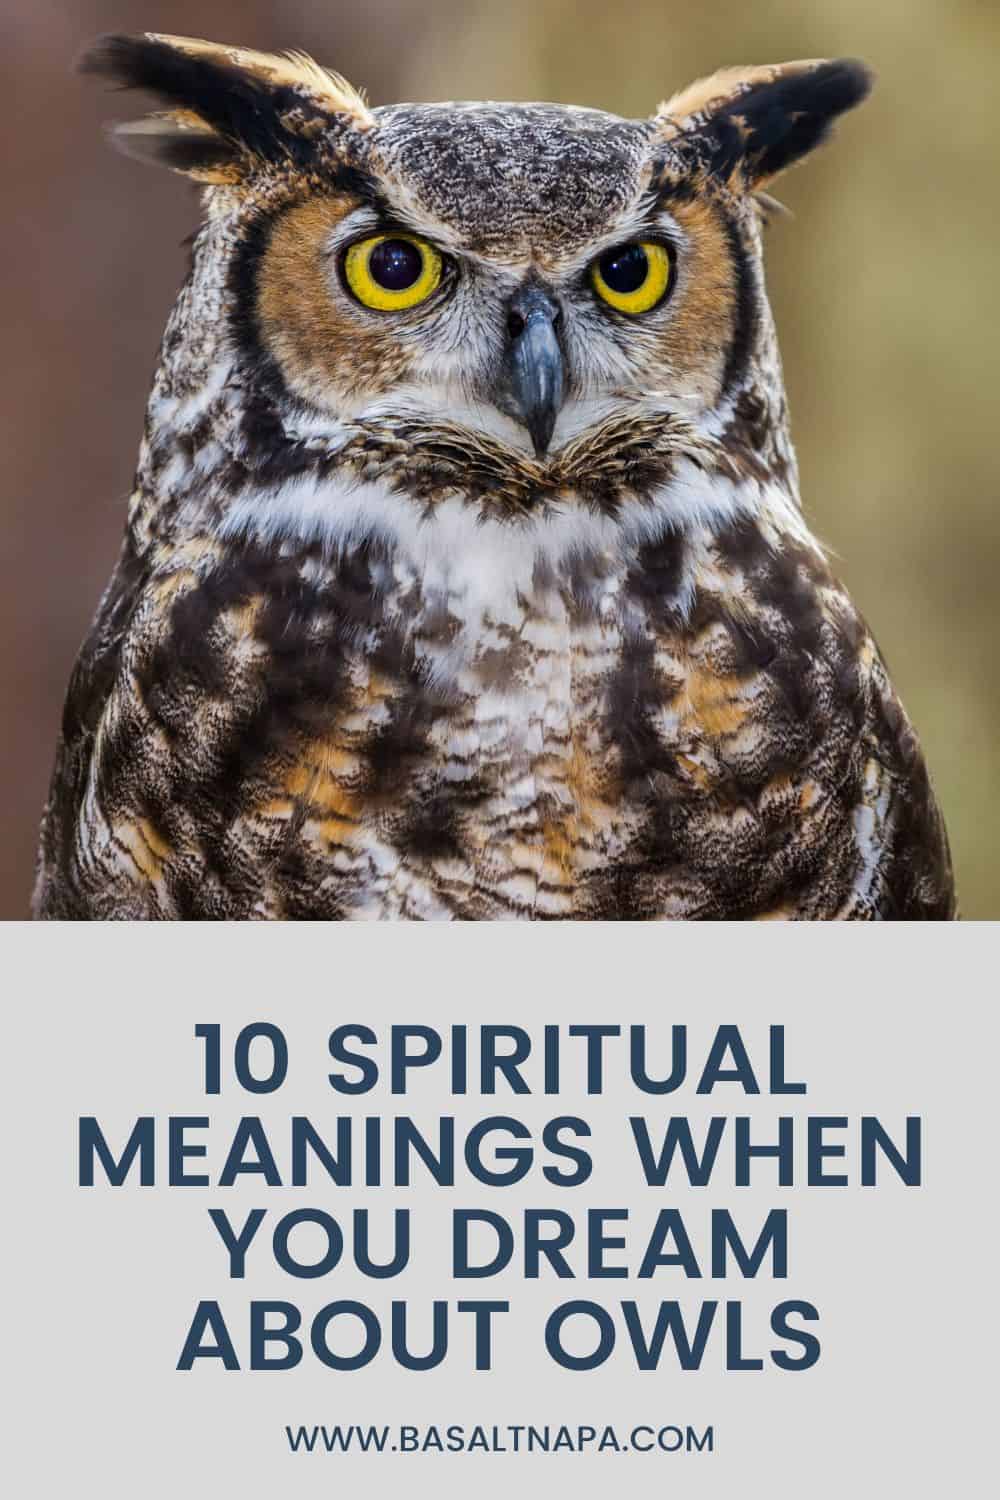 Spiritual Meanings When You Dream About Owls